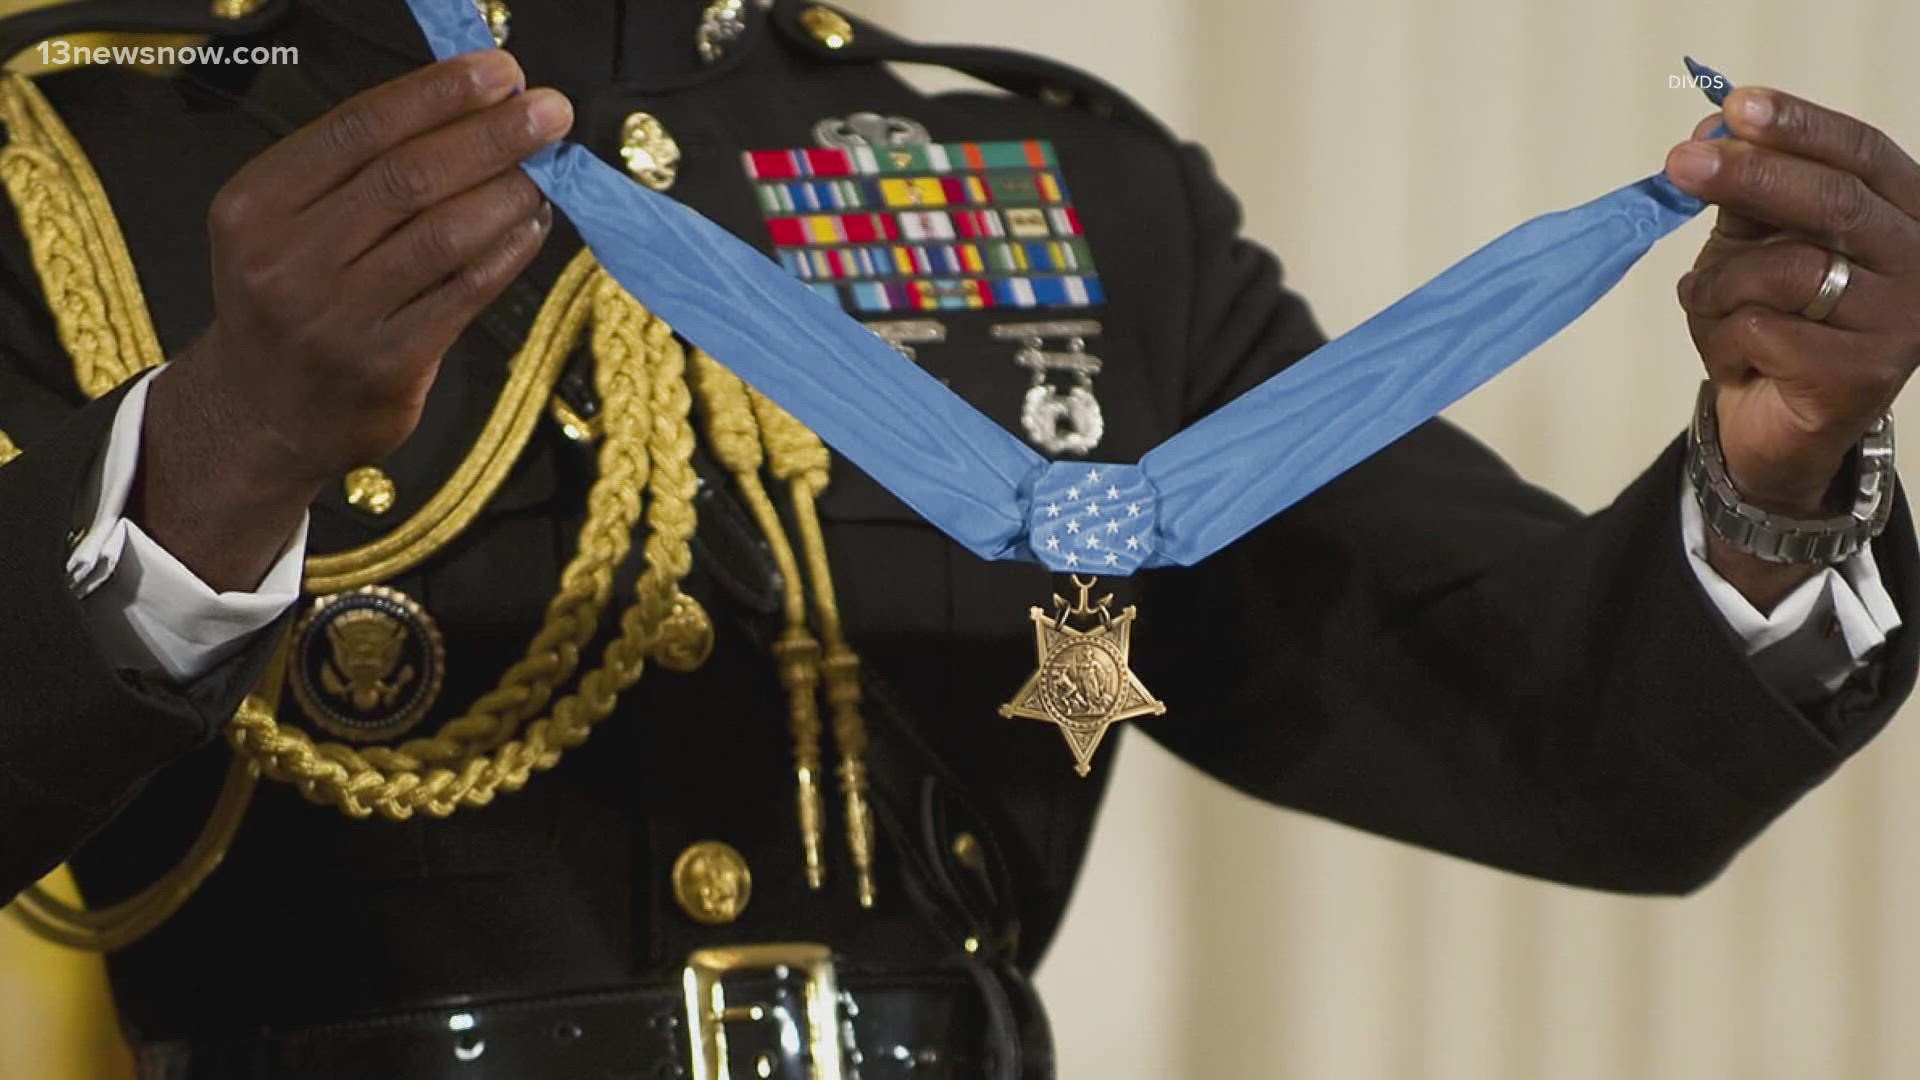 The medal was established by President Abraham Lincoln. This week, four Vietnam war heroes got their medals, and now will be remembered in the Hall of Heroes.